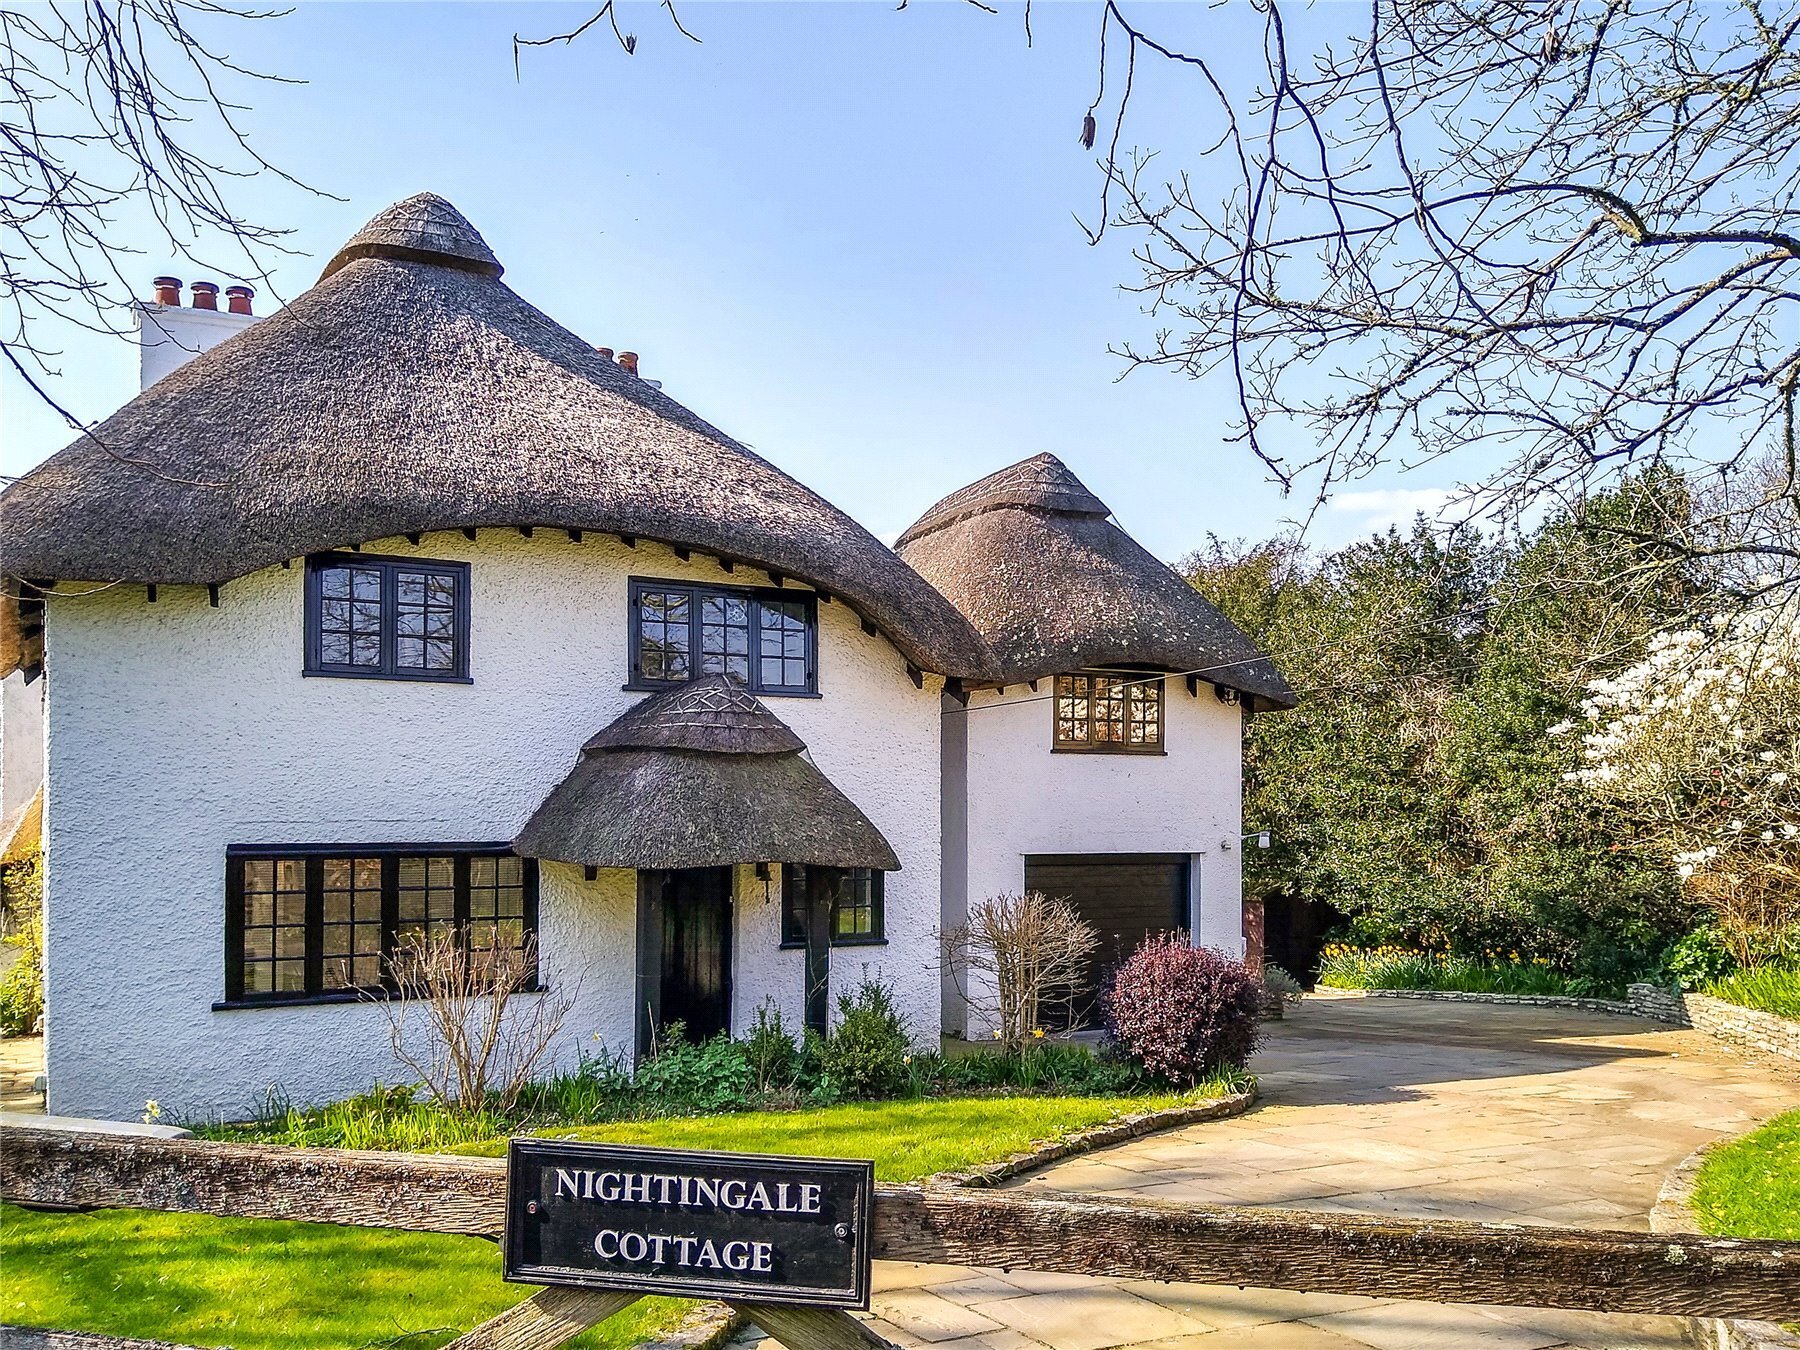 A Delightful 17th Century Thatched Cottage For Sale In A Magical Corner Of The New Forest